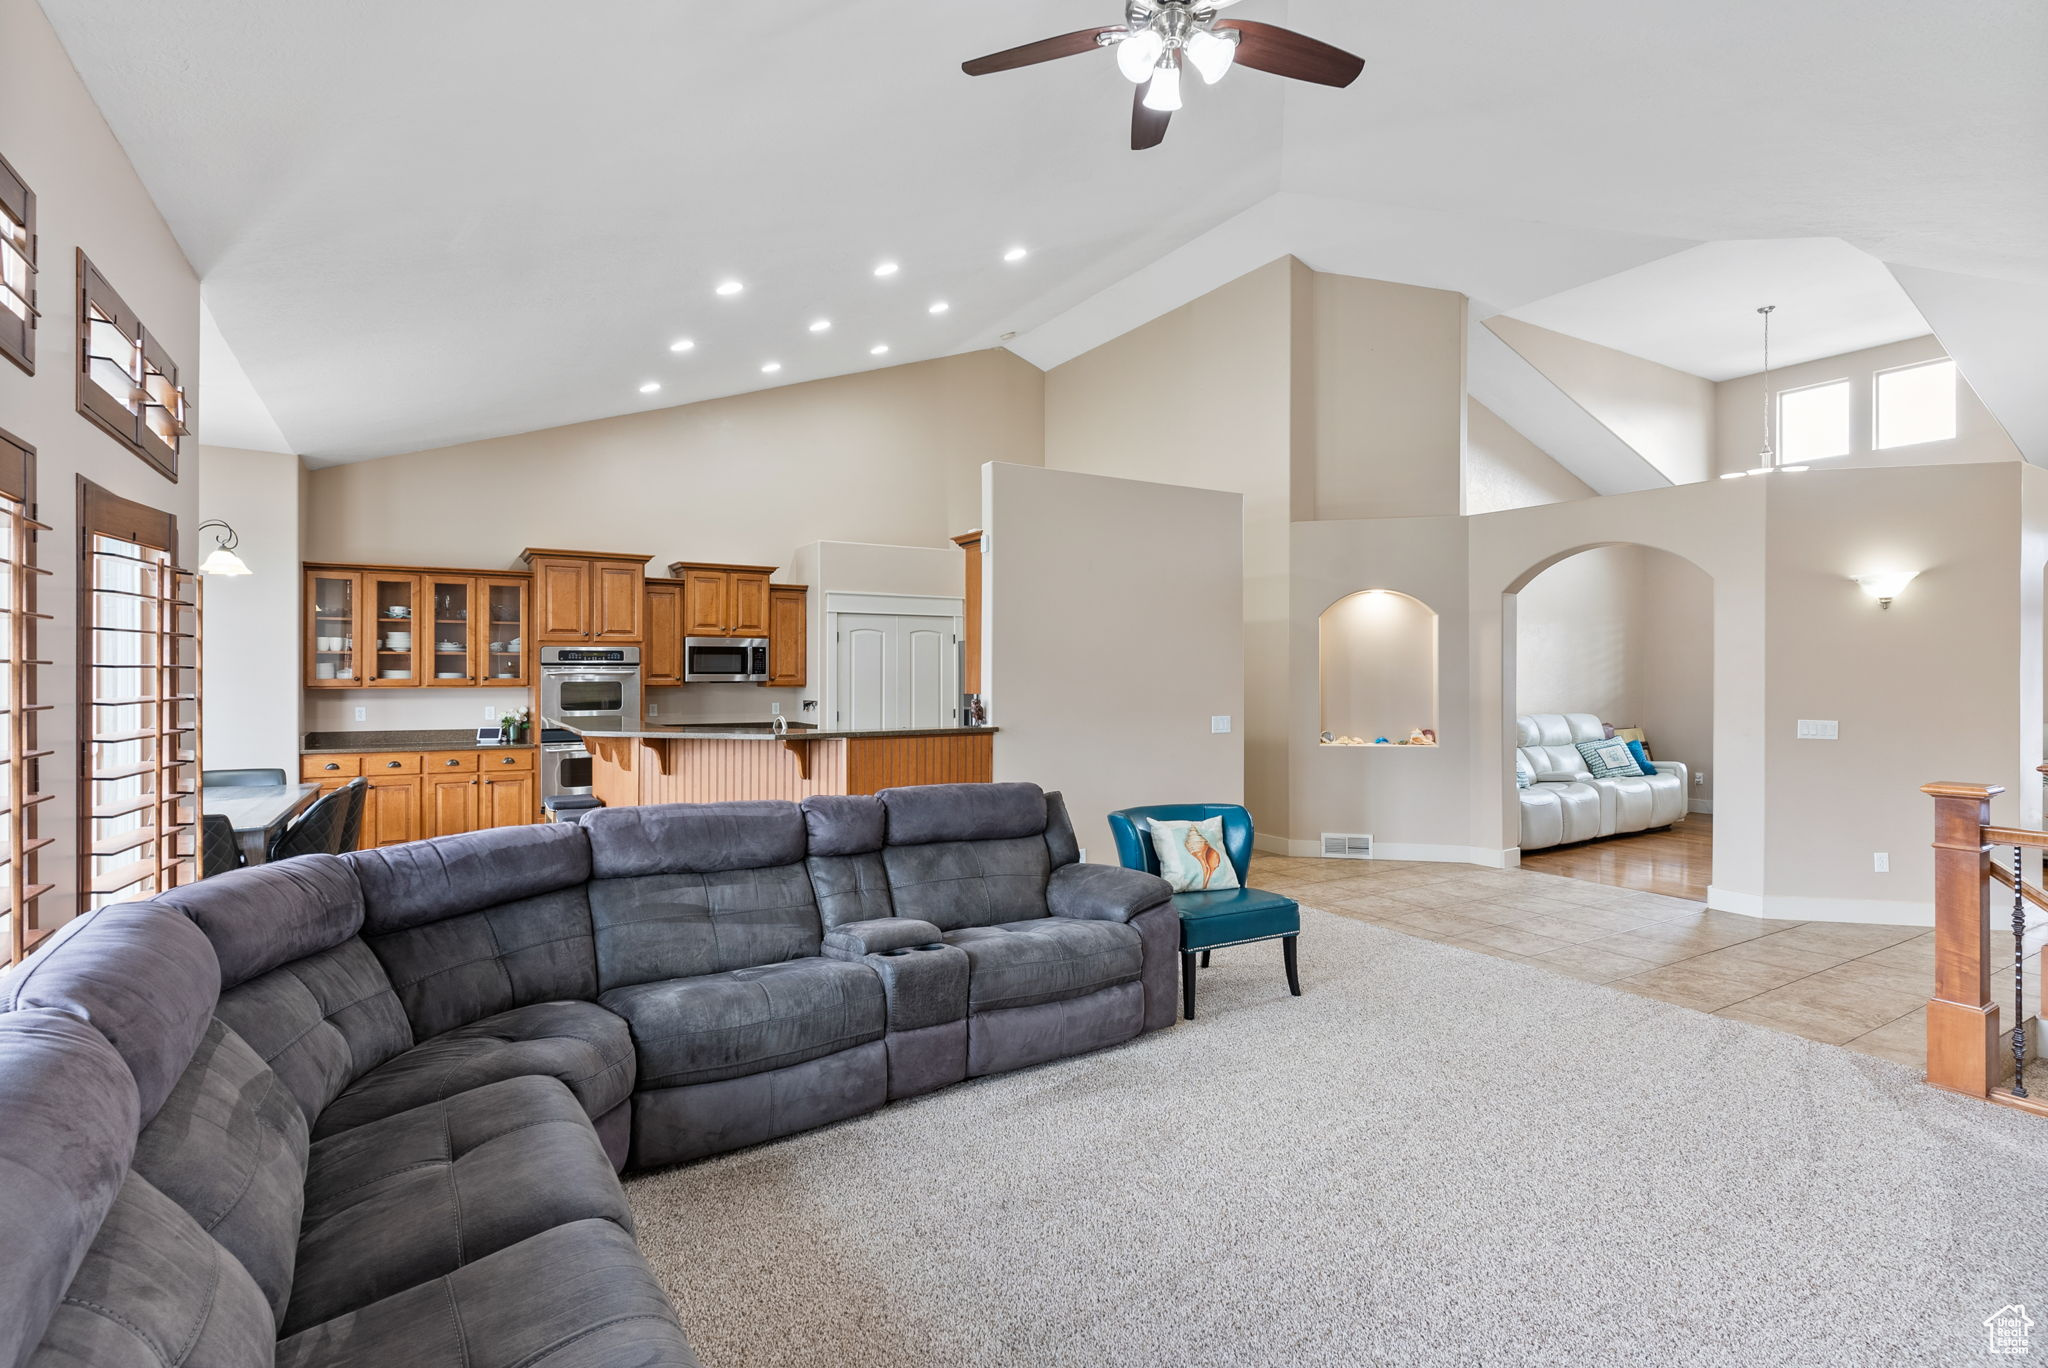 Family room featuring ceiling fan, light carpet, and high vaulted ceiling